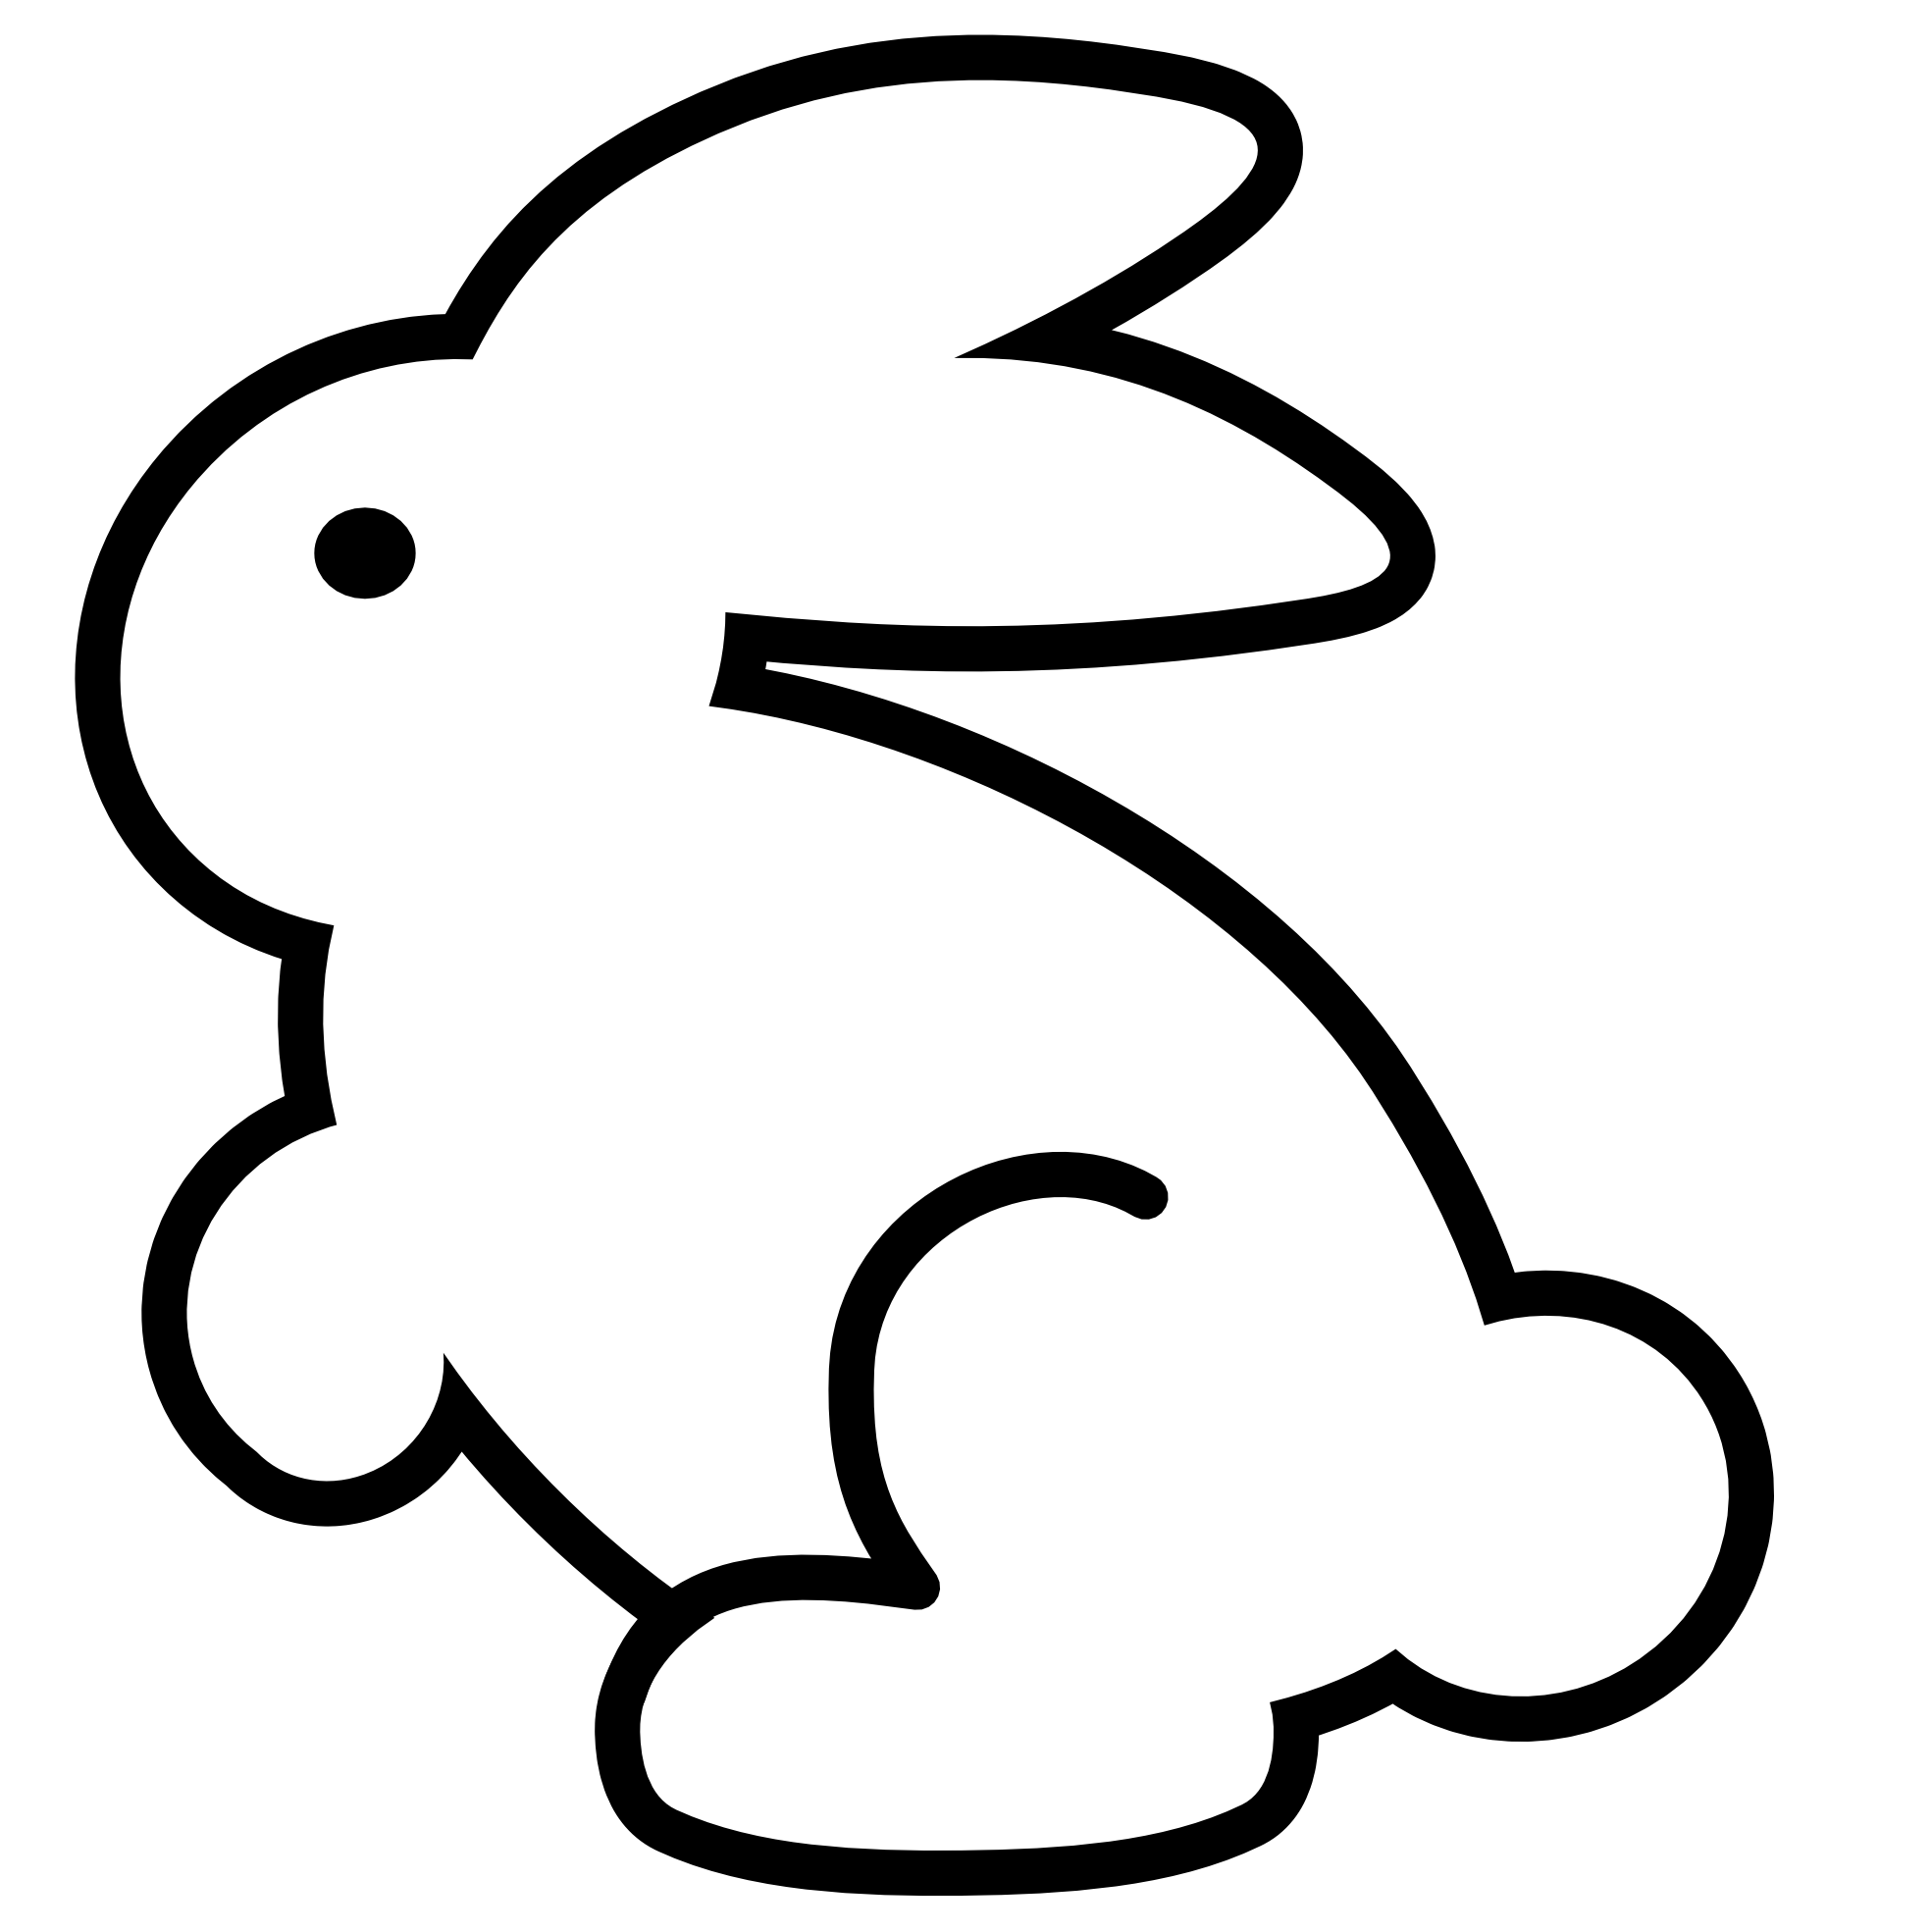 Bunny black and white. Ducks clipart coloring